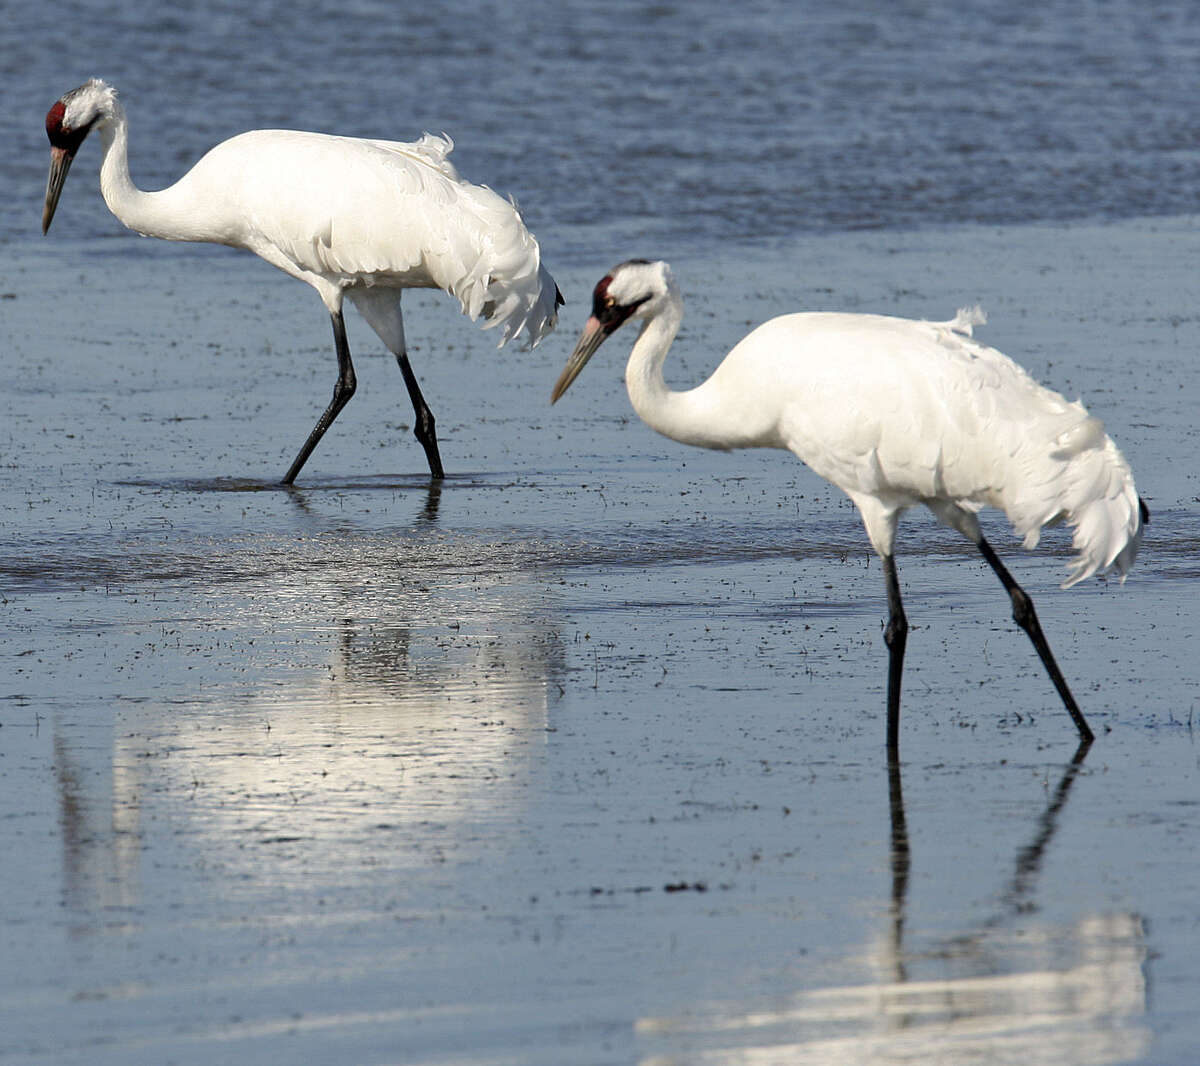 Whooping cranes feed in the Aransas National Wildlife Refuge in 2011. A flock spends the winter there every year, migrating between the refuge and breeding grounds in Canada.